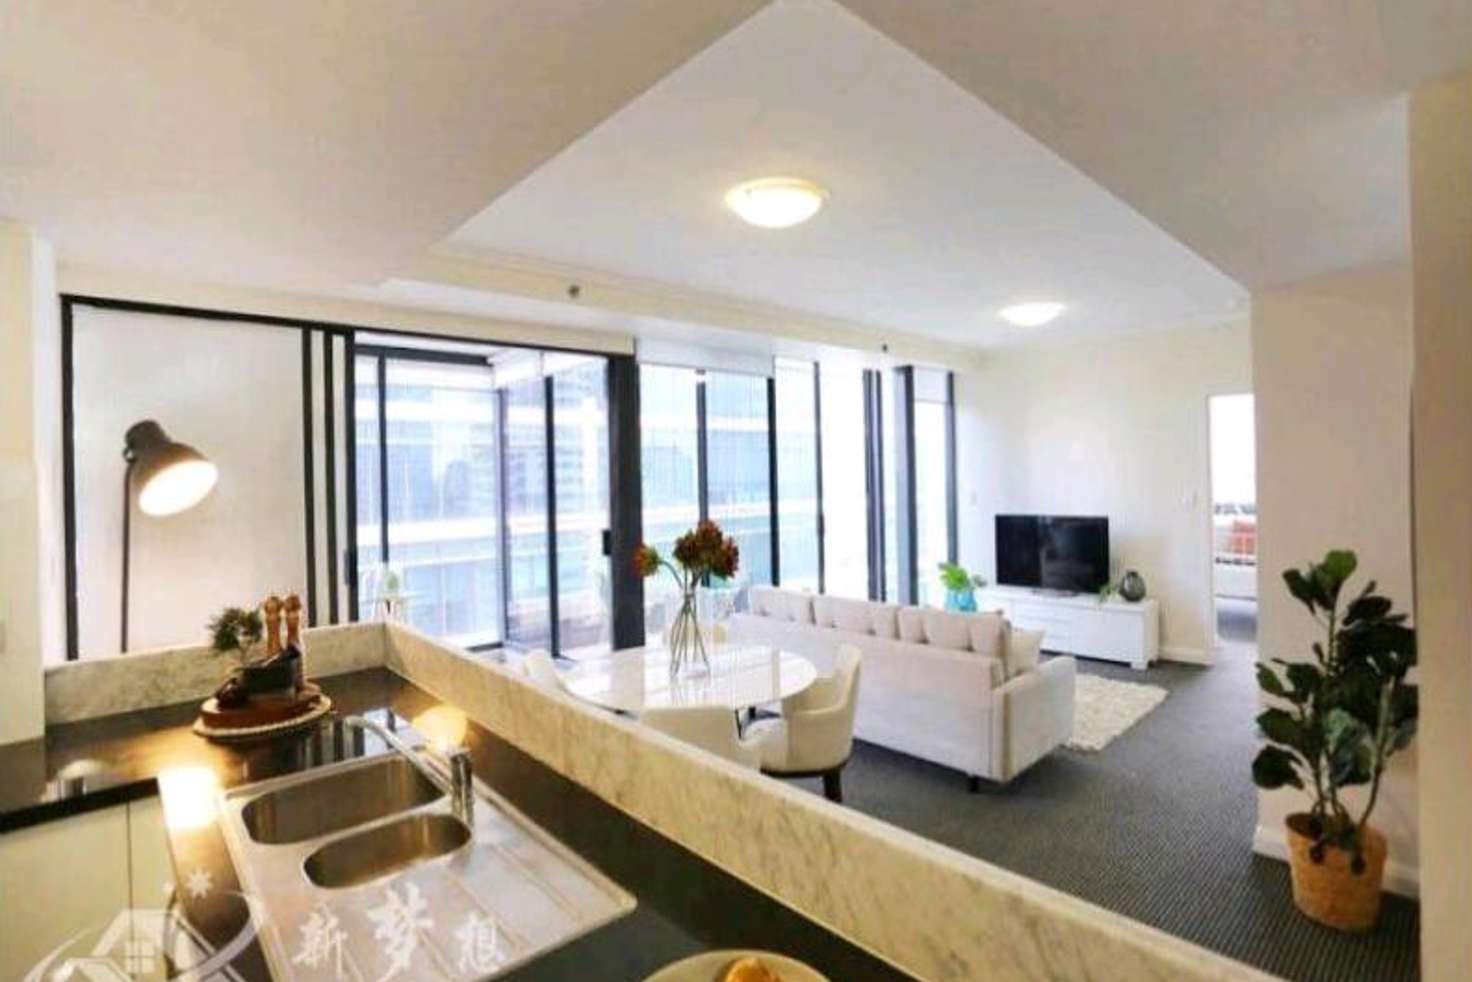 Main view of Homely apartment listing, 3604/91 Liverpool street, Sydney NSW 2000